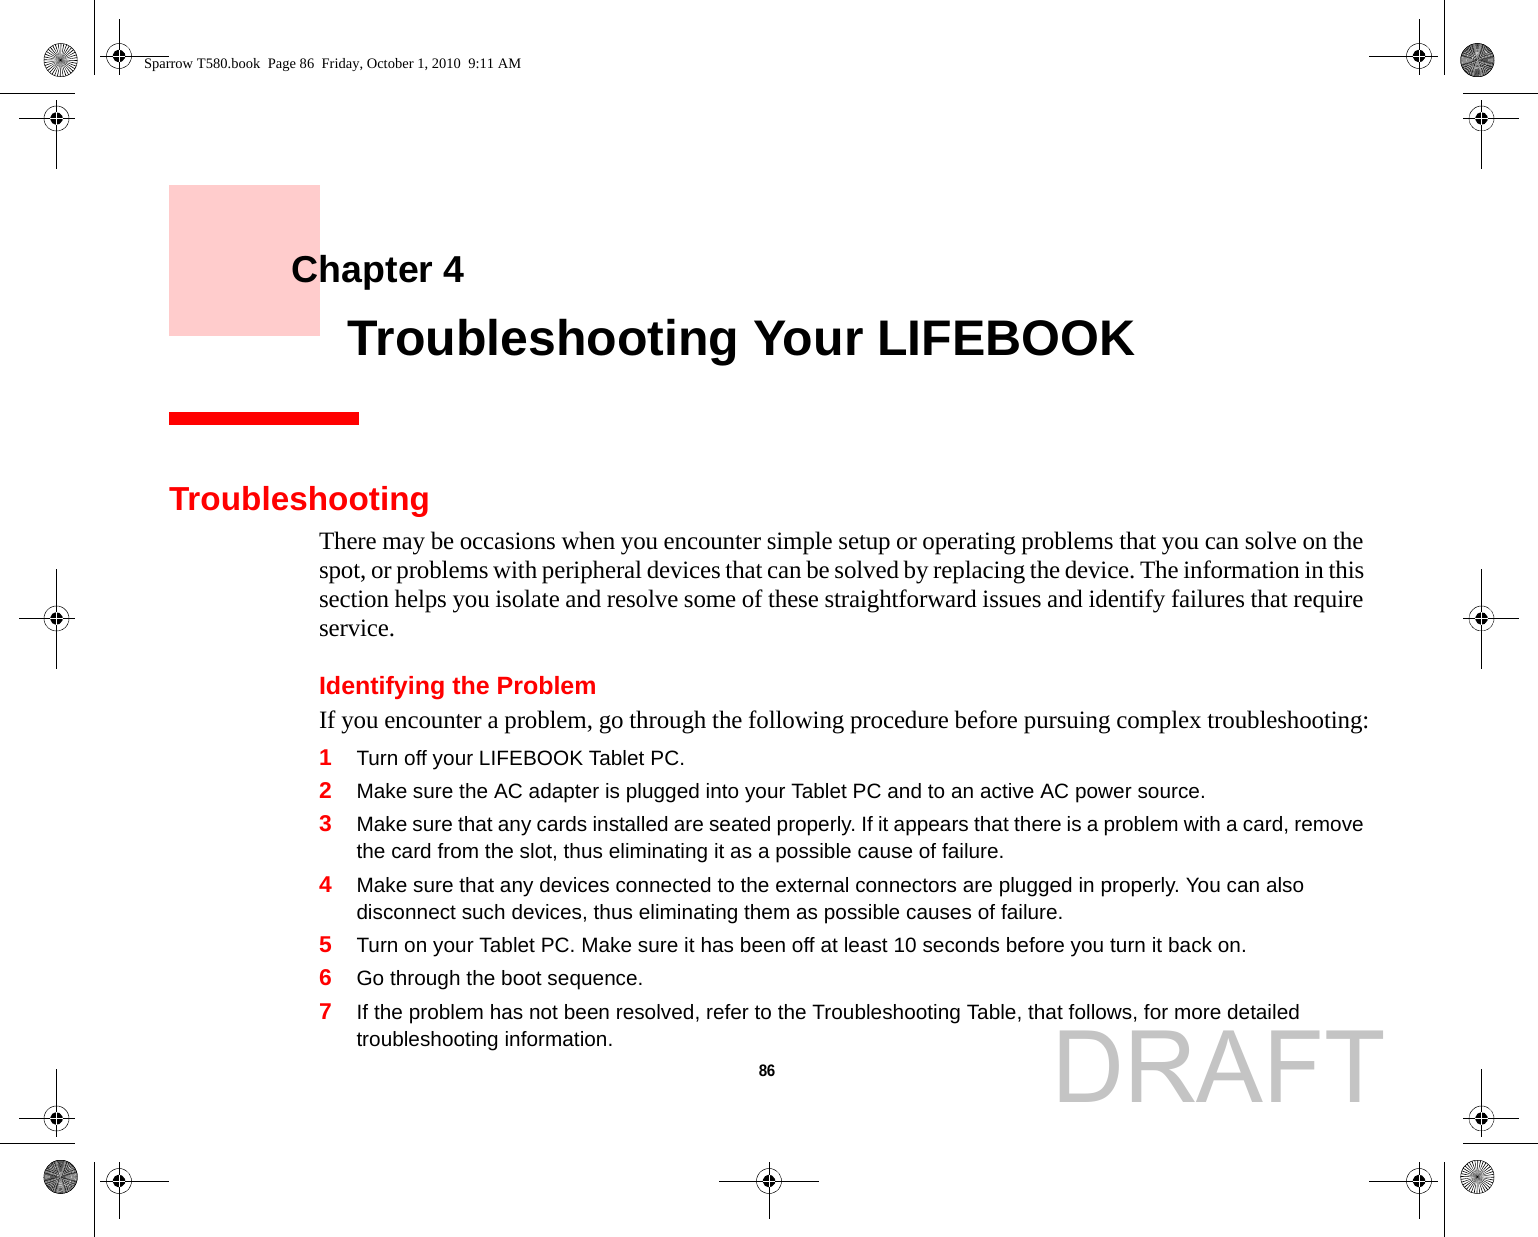 86     Chapter 4    Troubleshooting Your LIFEBOOKTroubleshootingThere may be occasions when you encounter simple setup or operating problems that you can solve on the spot, or problems with peripheral devices that can be solved by replacing the device. The information in this section helps you isolate and resolve some of these straightforward issues and identify failures that require service.Identifying the ProblemIf you encounter a problem, go through the following procedure before pursuing complex troubleshooting:1Turn off your LIFEBOOK Tablet PC.2Make sure the AC adapter is plugged into your Tablet PC and to an active AC power source.3Make sure that any cards installed are seated properly. If it appears that there is a problem with a card, remove the card from the slot, thus eliminating it as a possible cause of failure.4Make sure that any devices connected to the external connectors are plugged in properly. You can also disconnect such devices, thus eliminating them as possible causes of failure.5Turn on your Tablet PC. Make sure it has been off at least 10 seconds before you turn it back on.6Go through the boot sequence.7If the problem has not been resolved, refer to the Troubleshooting Table, that follows, for more detailed troubleshooting information.Sparrow T580.book  Page 86  Friday, October 1, 2010  9:11 AMDRAFT